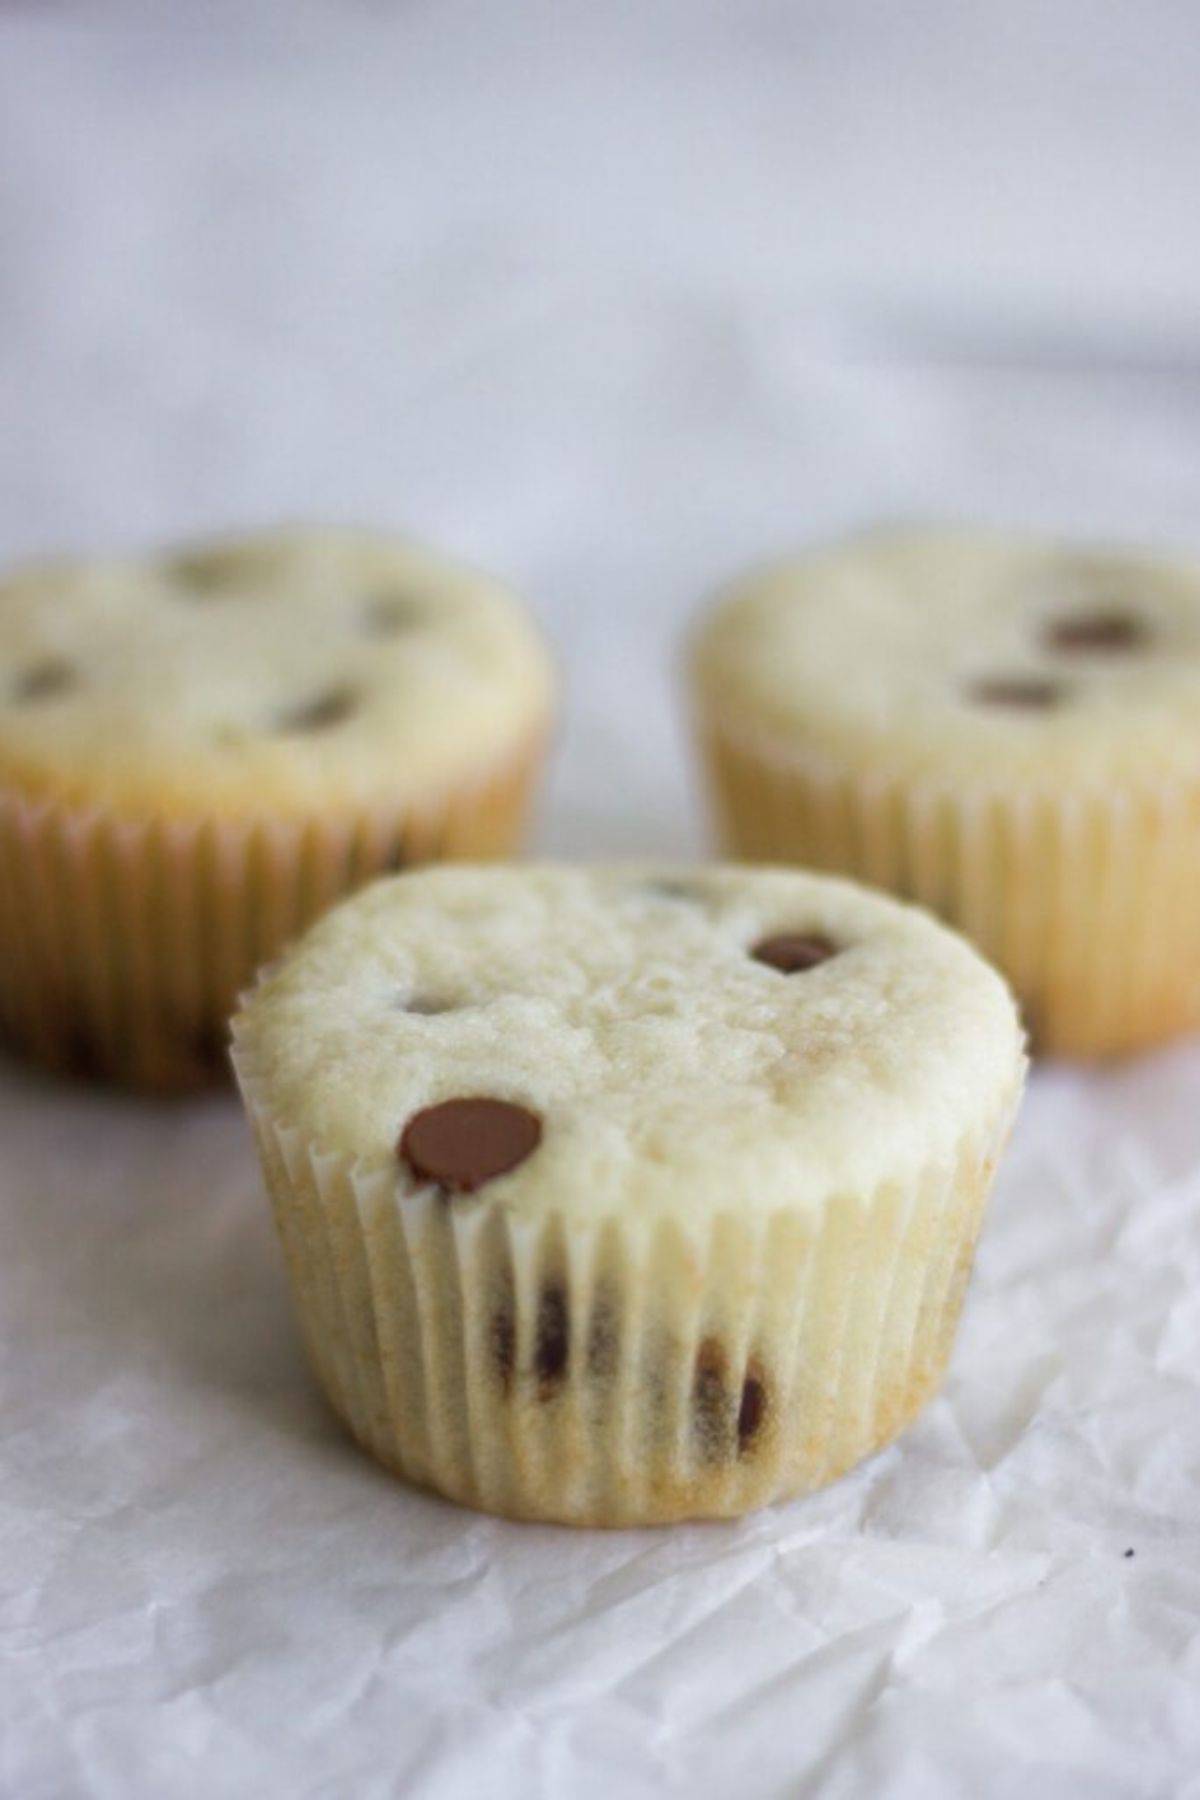 image of not frosted chocolate chip cupcakes